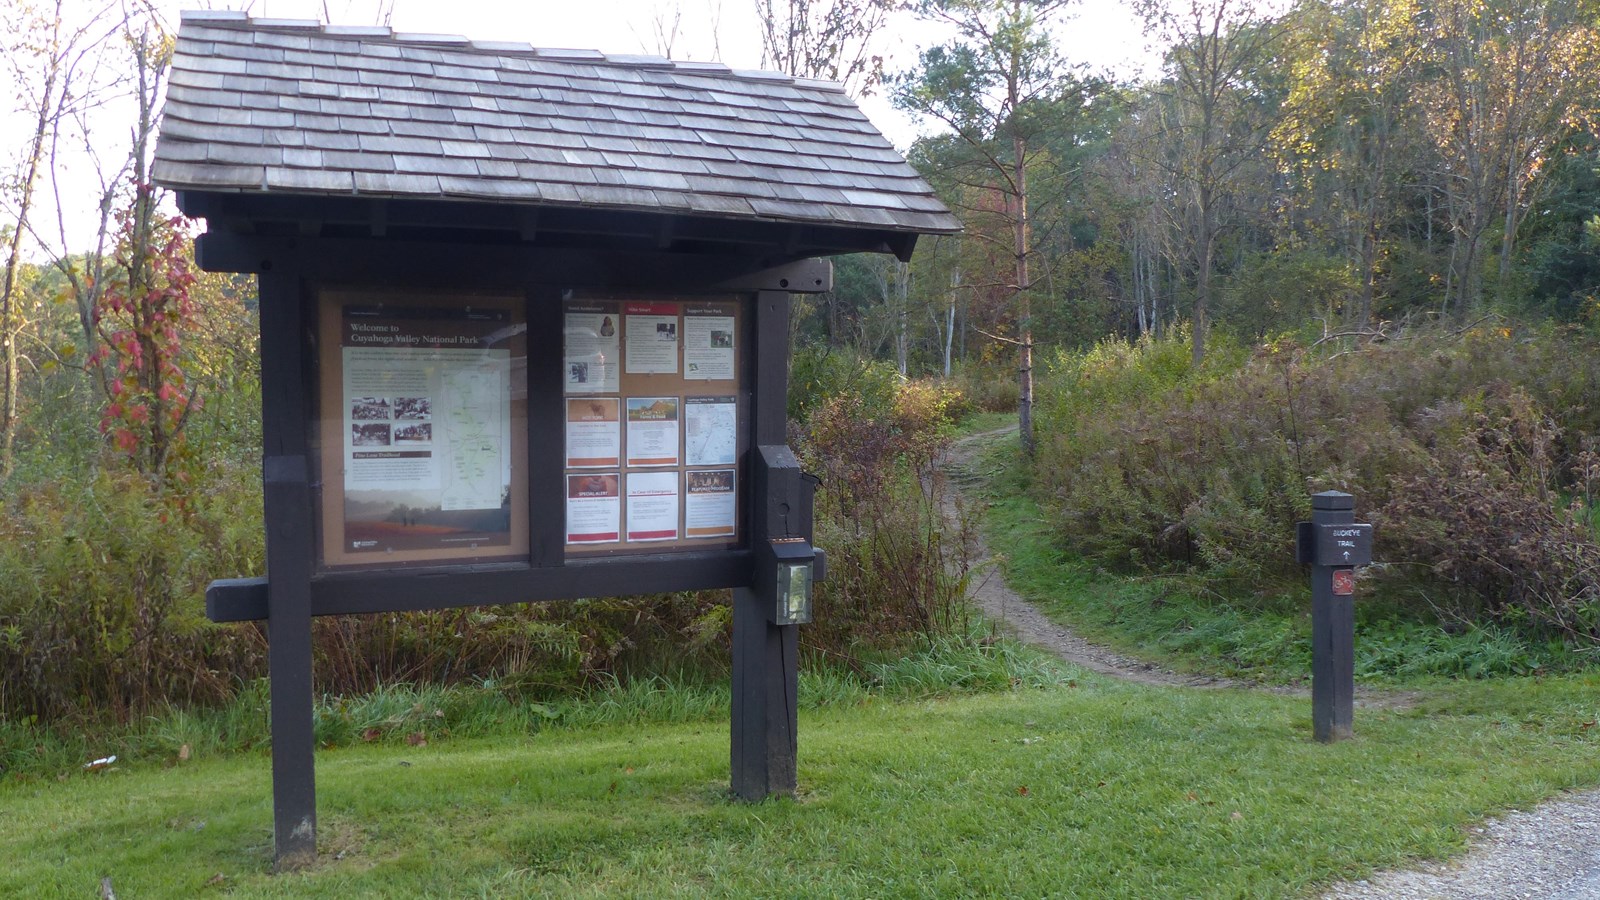 A two paneled bulletin board kiosk stands left of a narrow, dirt trail into yellowing trees.